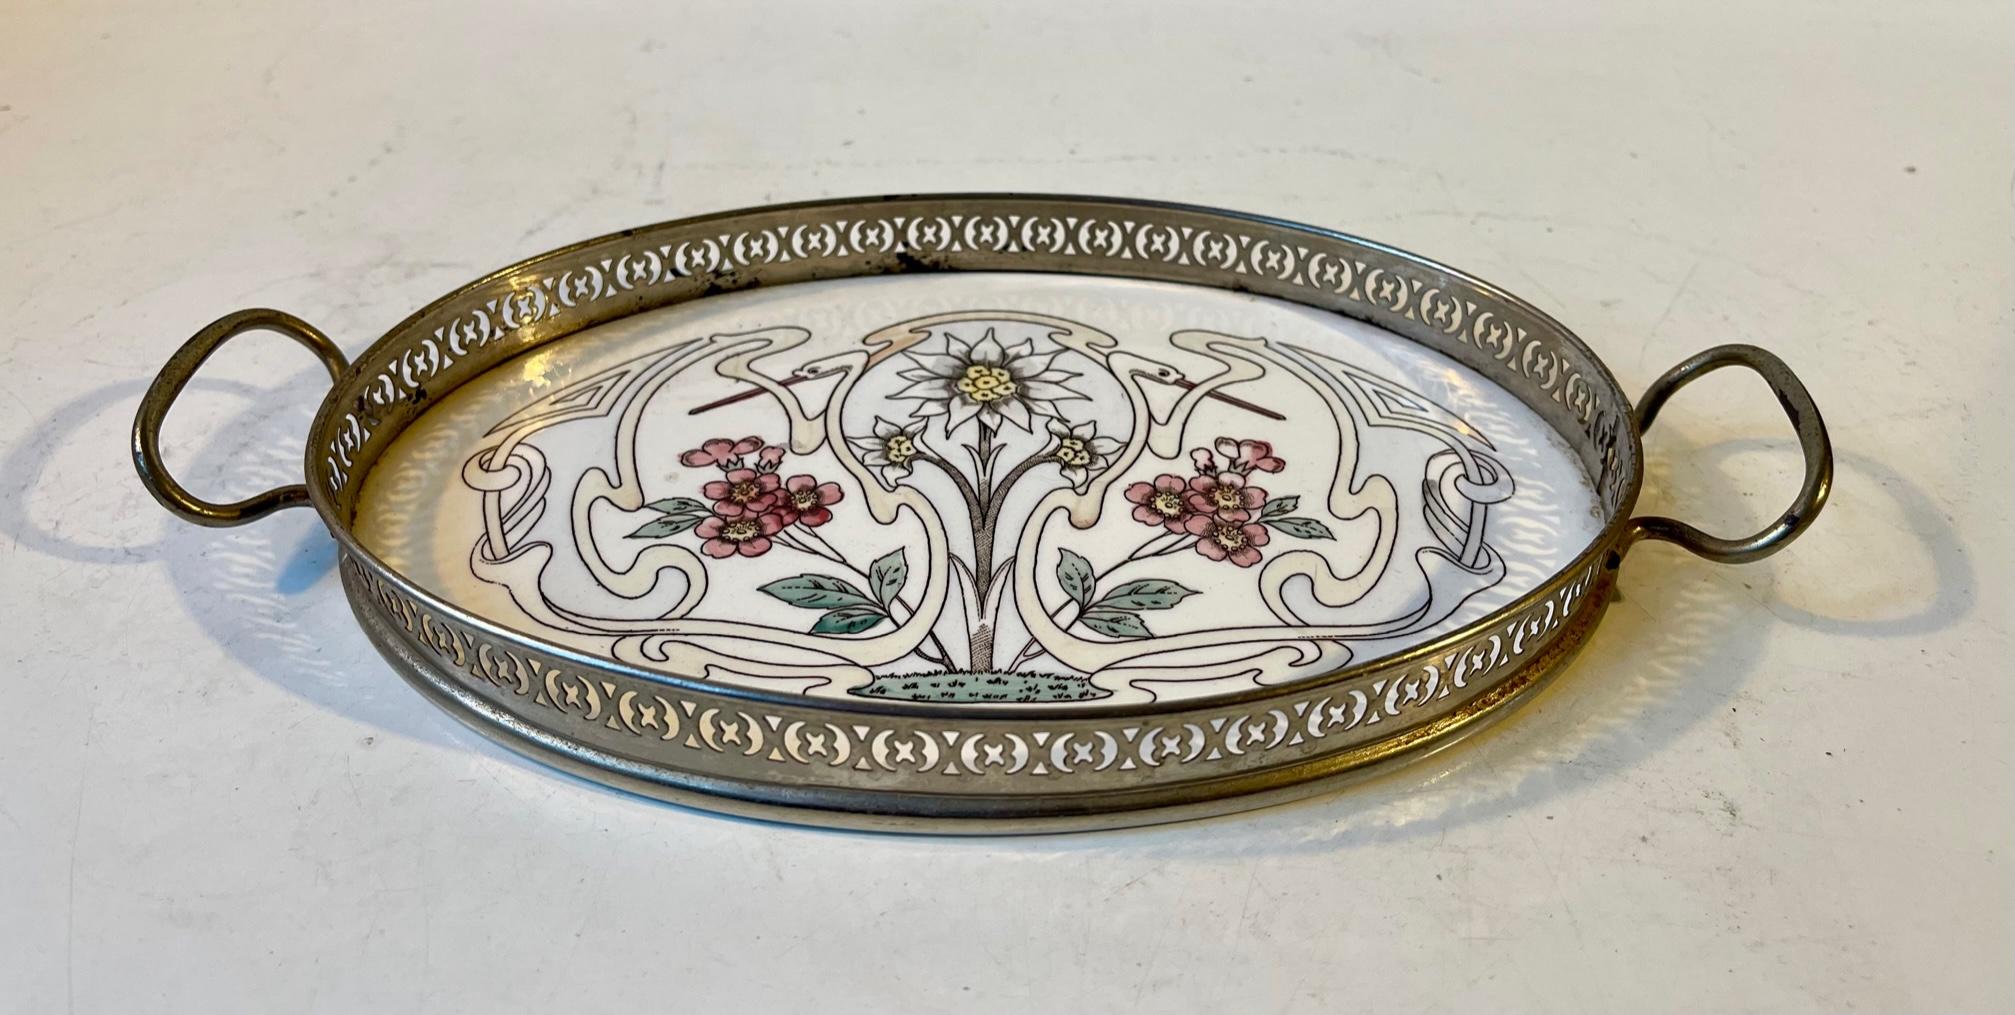 A decorative small sized oval tray in perforated nickel-plated metal and hand painted porcelain. The stars of this motif are two stylized swans that wraps around floral decorations. Stamped decor 1711 and some other numerals to its backside. Unknown